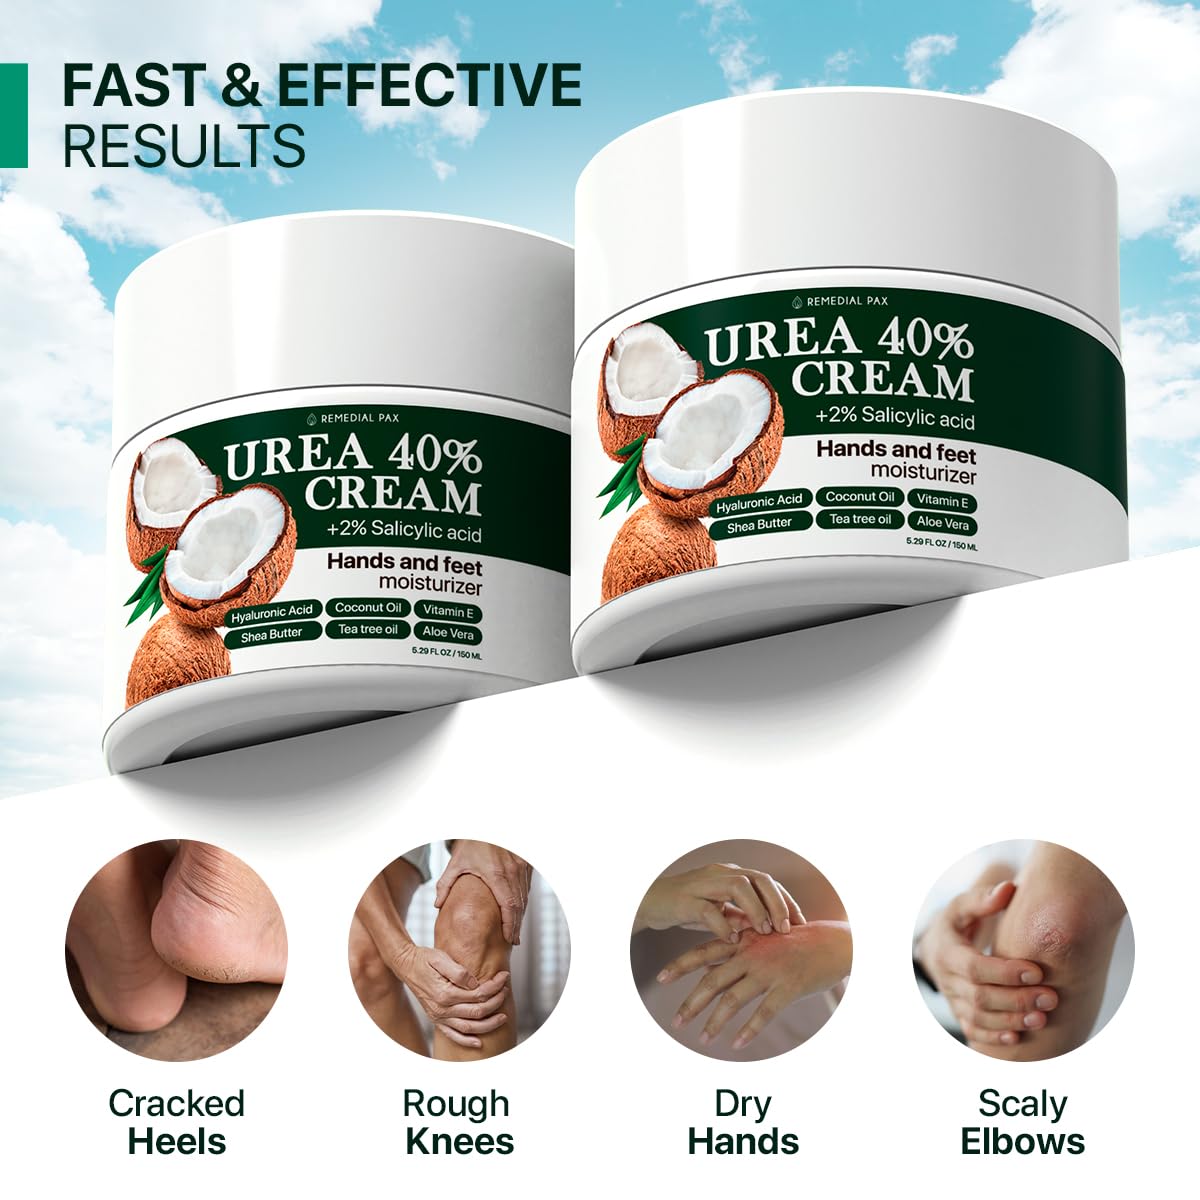 Urea Cream 40 Percent for Feet, 40% Urea Foot Cream for Dry Cracked Heels Knees Elbows Callus Hands Repair Treatment with 2% Salicylic Acid, Foot Moisturizer, Dead Skin Remover, Softener for Feet Care : Beauty & Personal Care